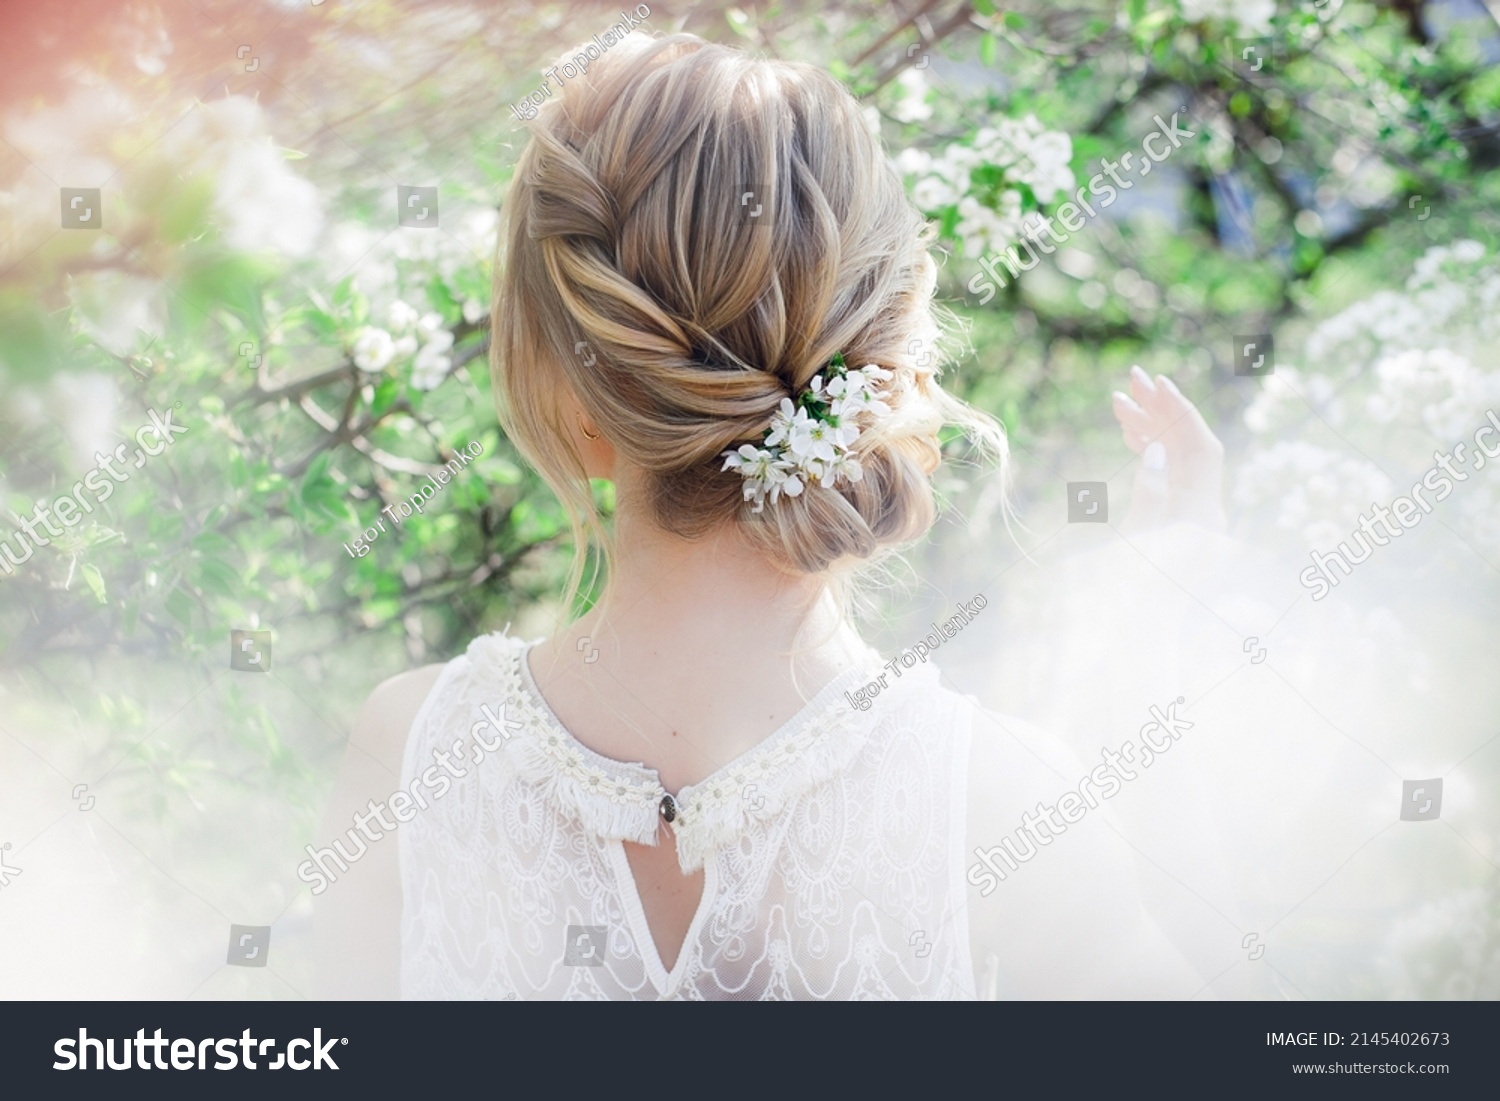 Art work hairstyles with weaving for a blonde bride in a blooming spring garden with green leaves #2145402673